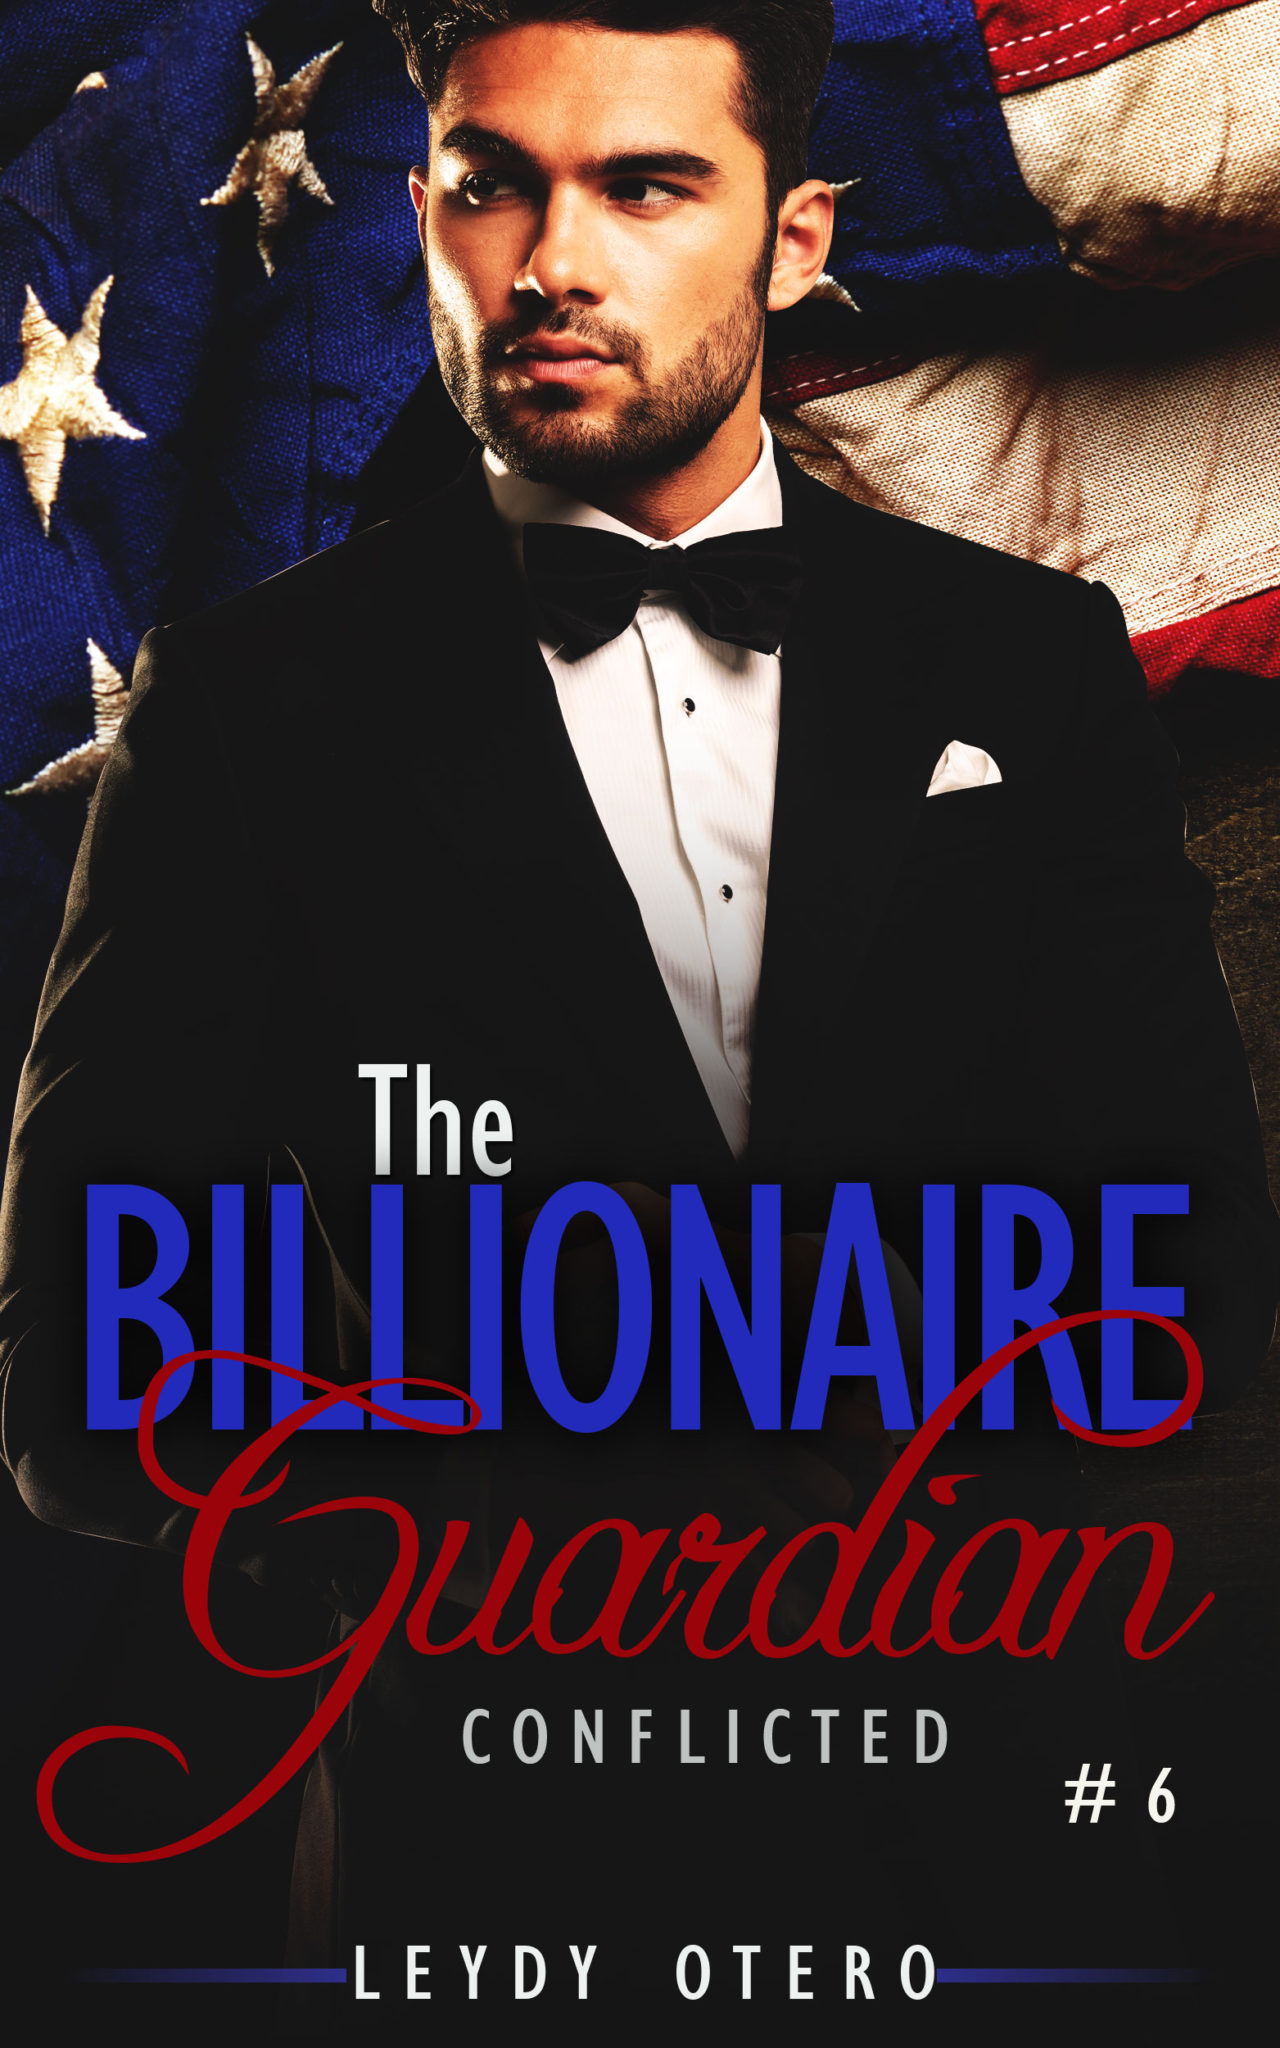 FREE: Conflicted: (The Billionaire Guardian Book 6) by Leydy Otero